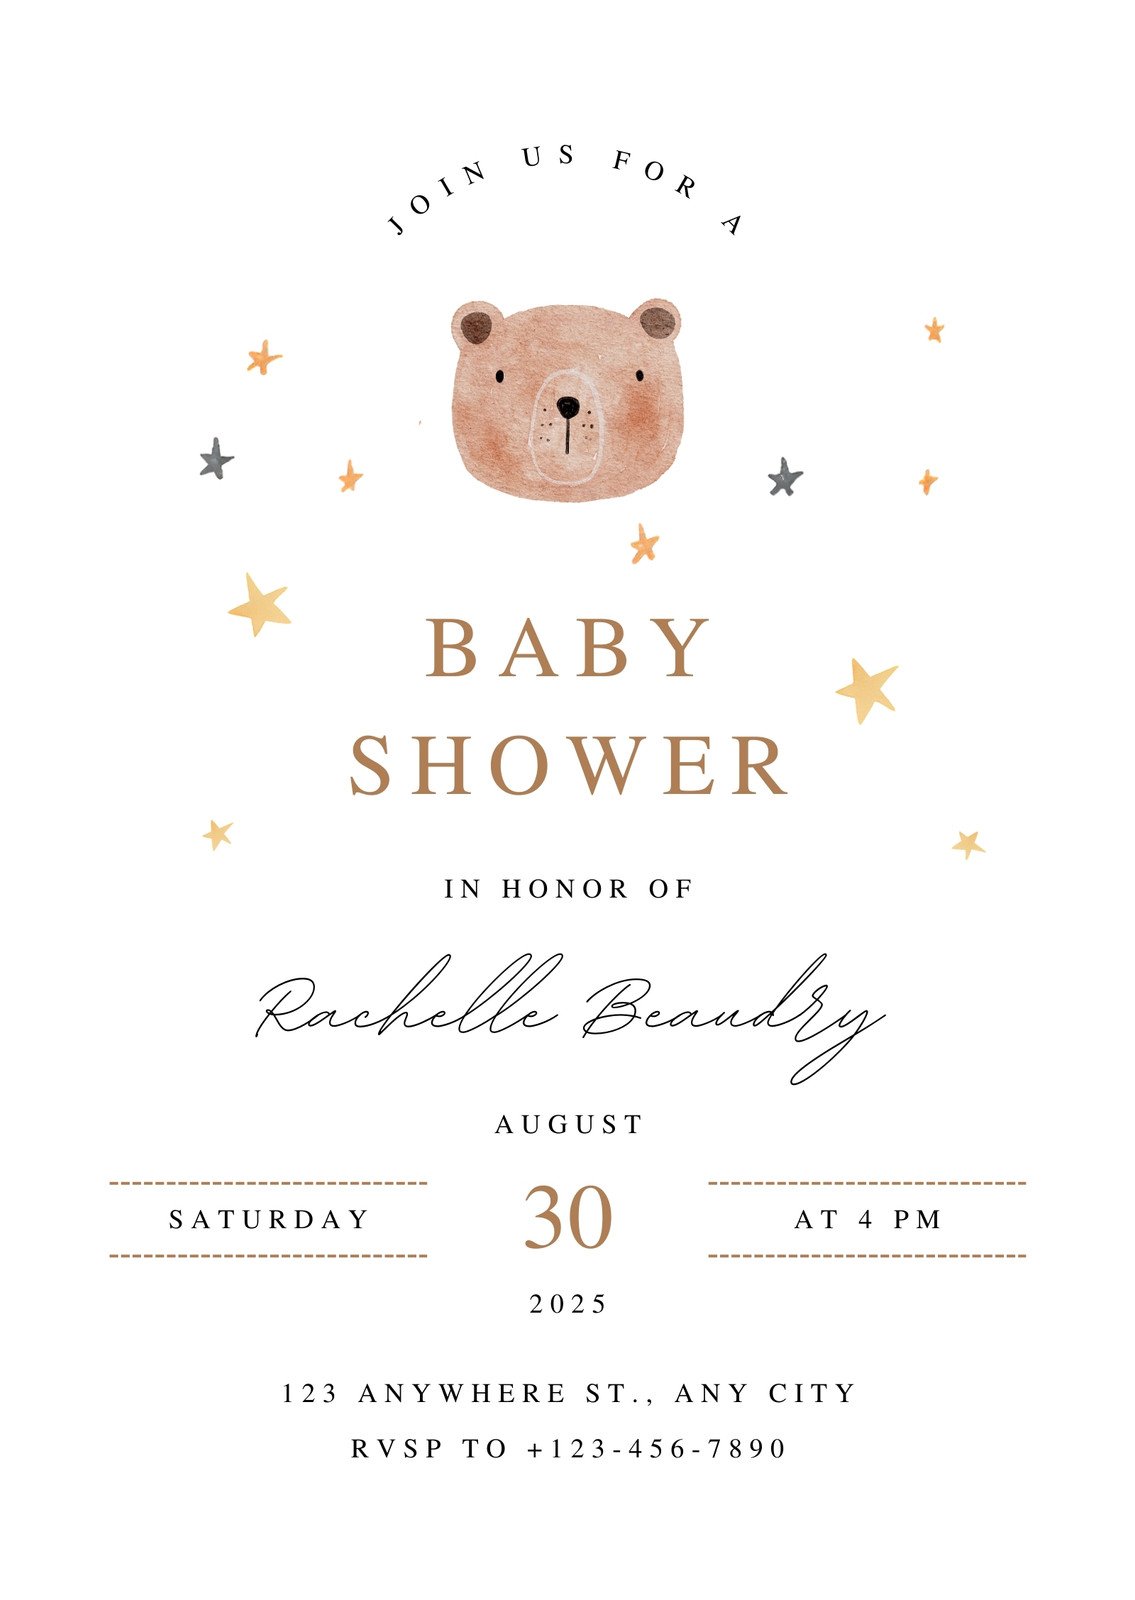 canva white and brown watercolor cute baby shower invitation uQ8iv8IrfJo